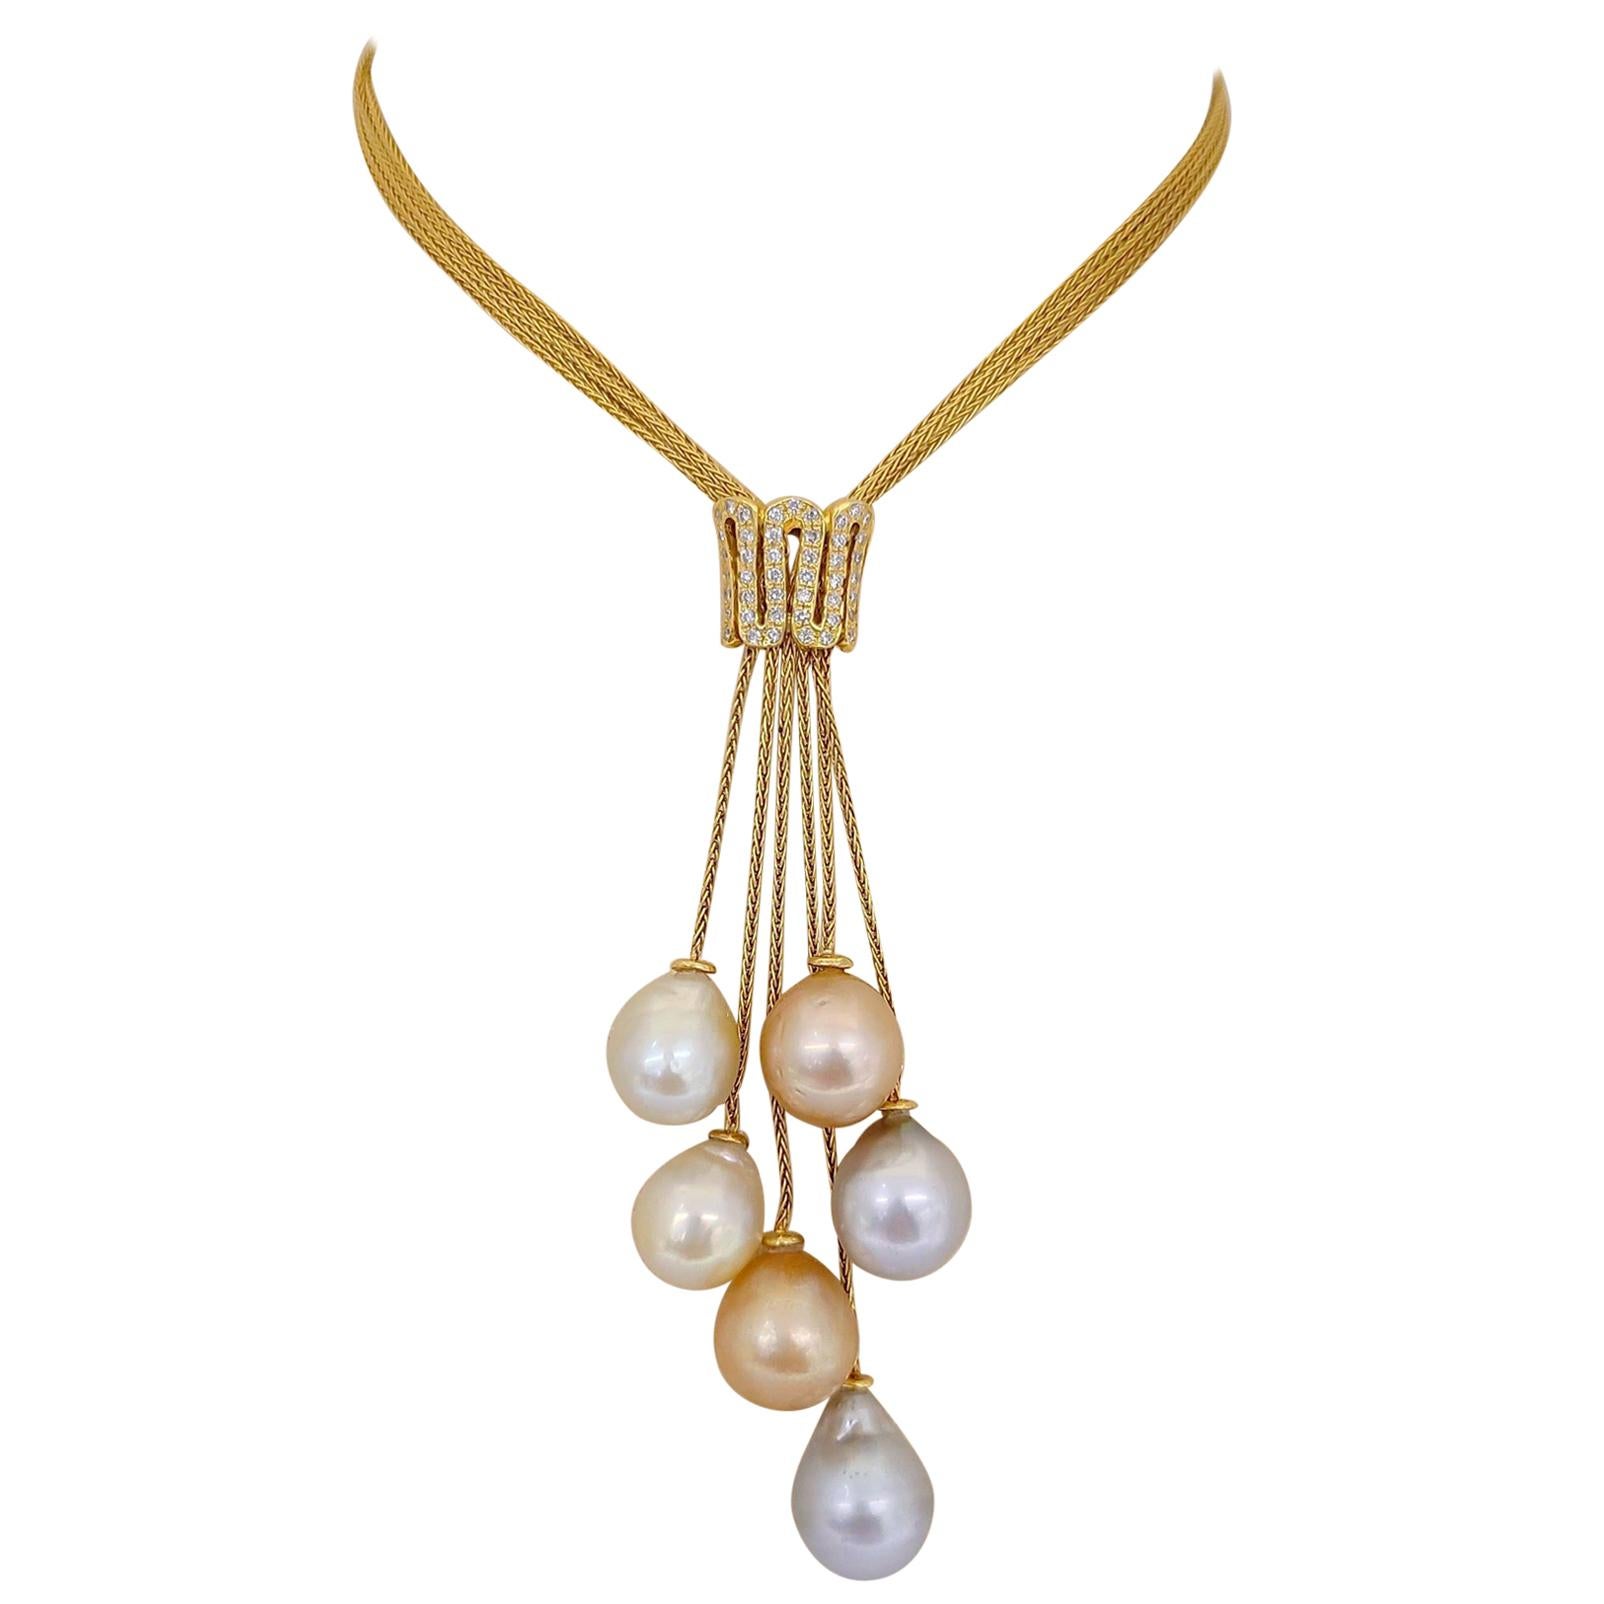 Yvel 18 Karat Yellow Gold Necklace with South Sea Pearls and .50 Carat Diamonds